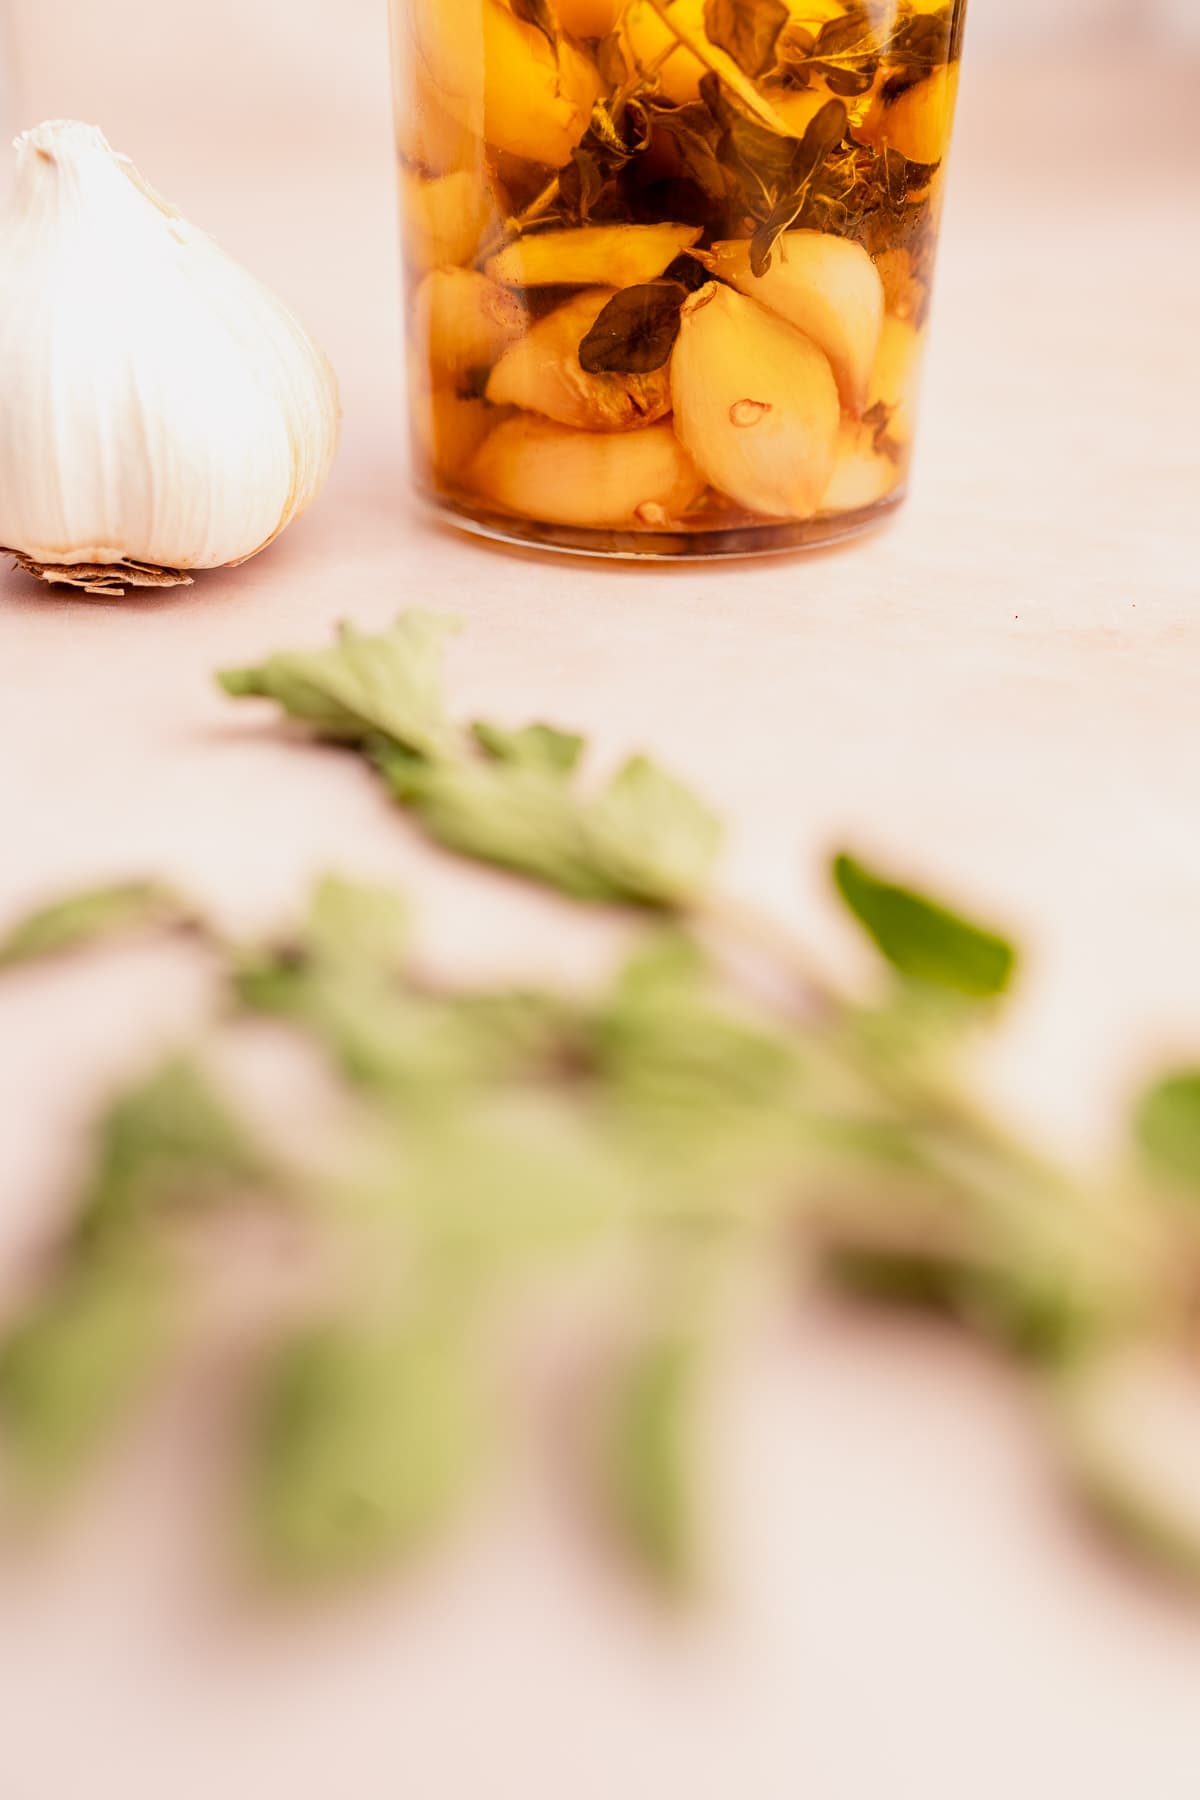 A jar of garlic confit and herbs on a table.